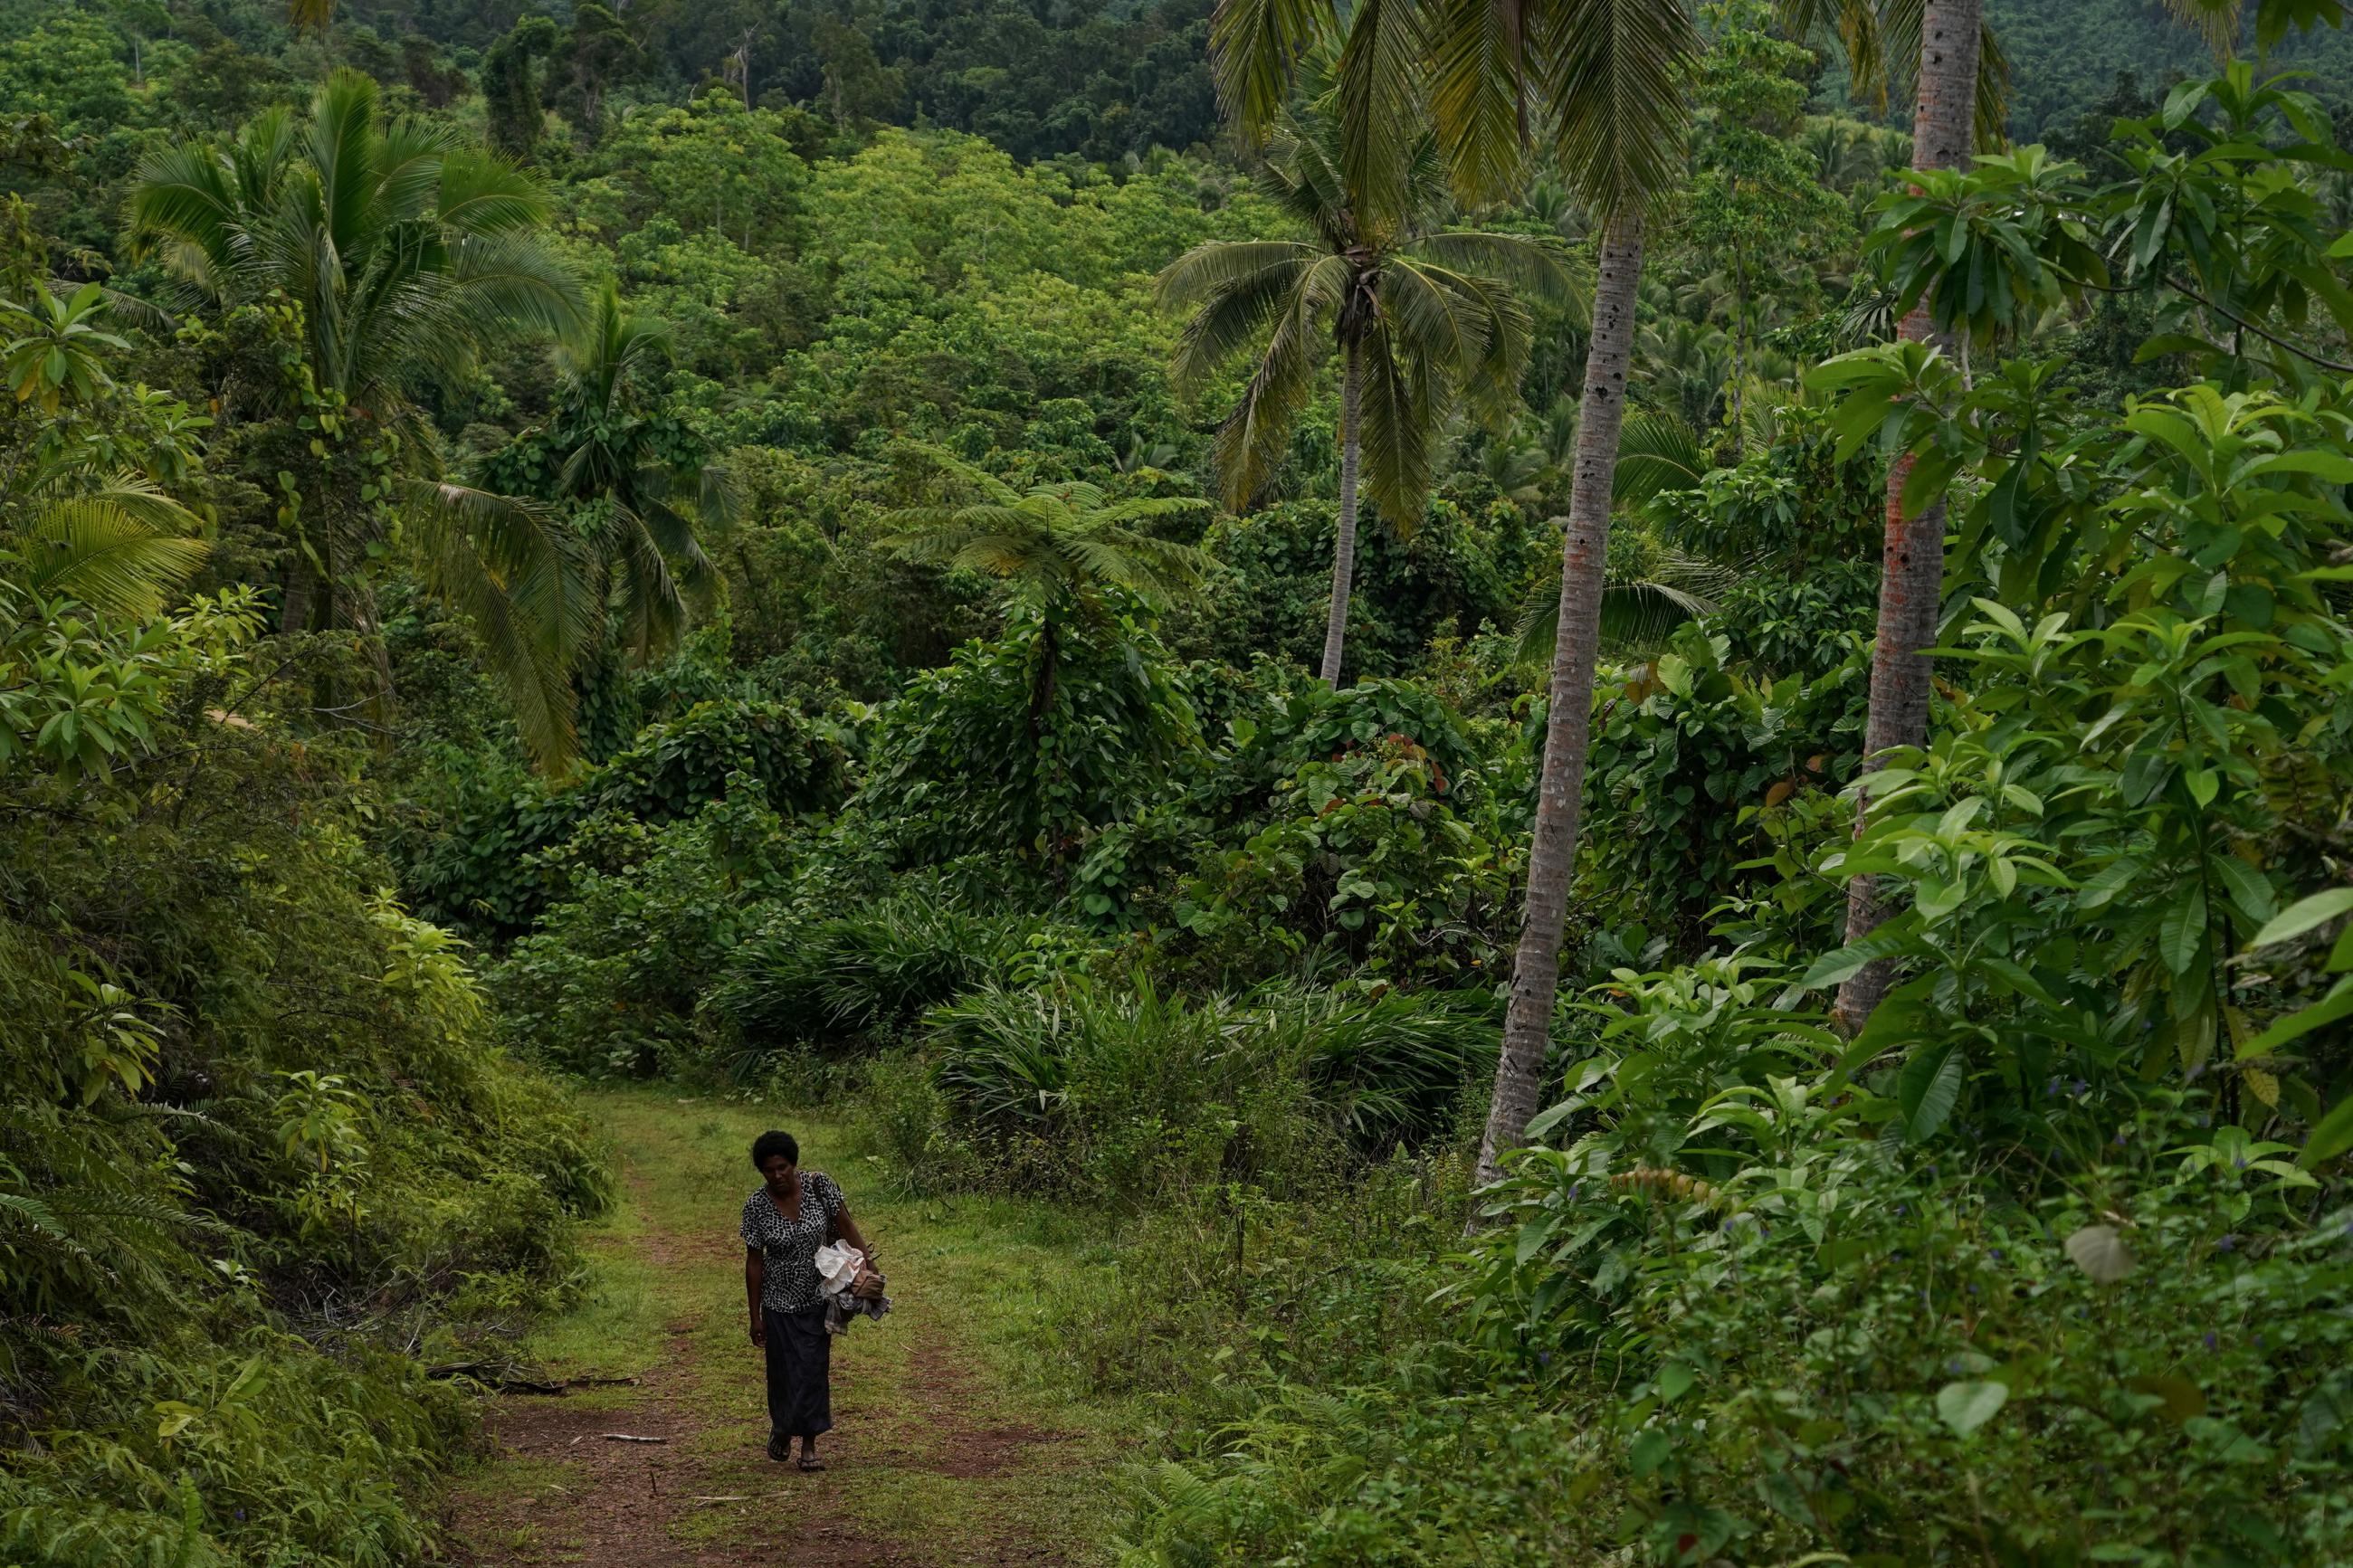 A woman wearing a black blouse and slacks is pictured walking down a cleared pathway in a lush, green jungle in Fiji.  